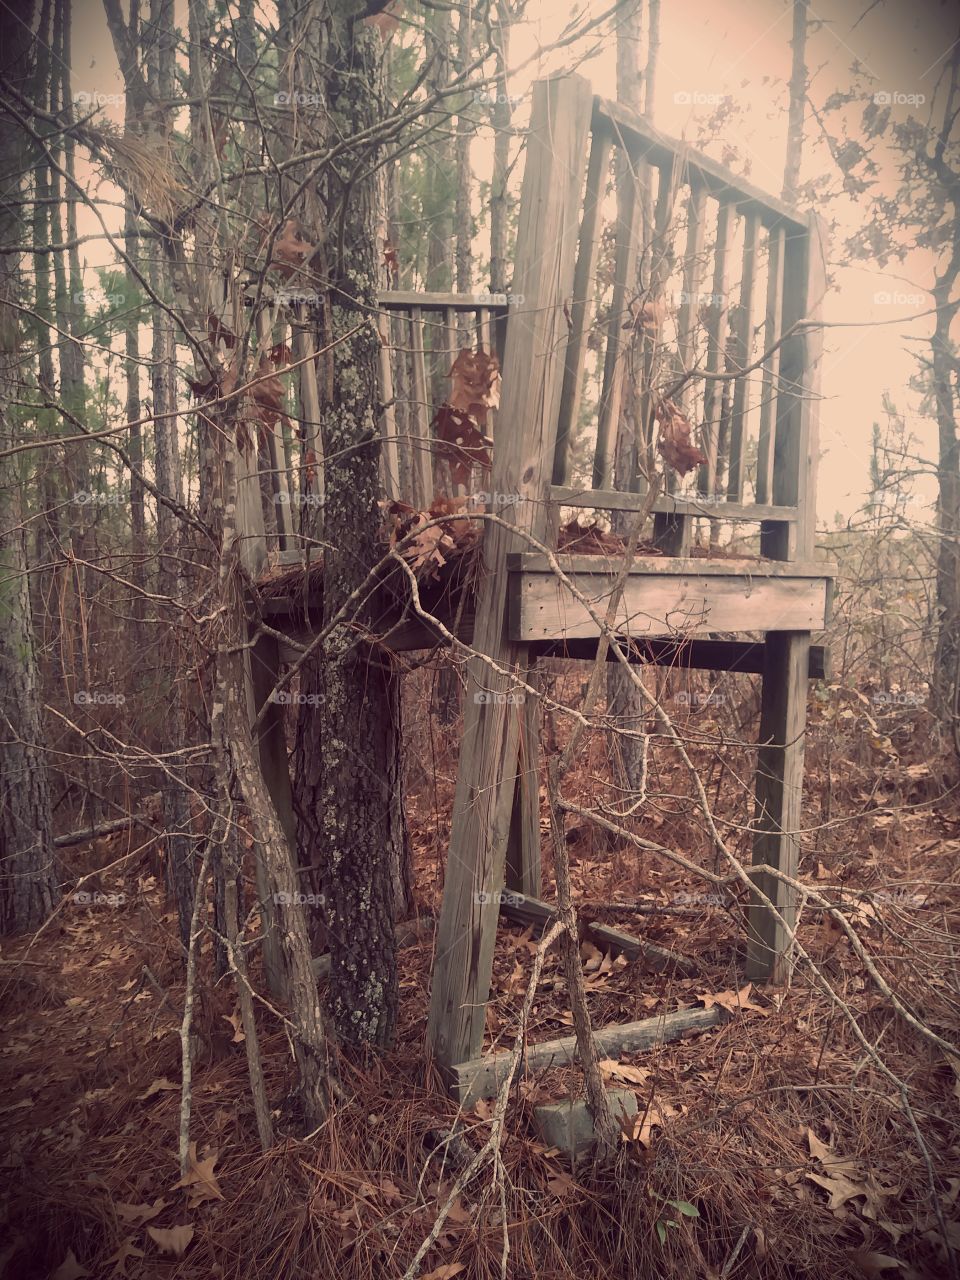 Wreckage in the Woods